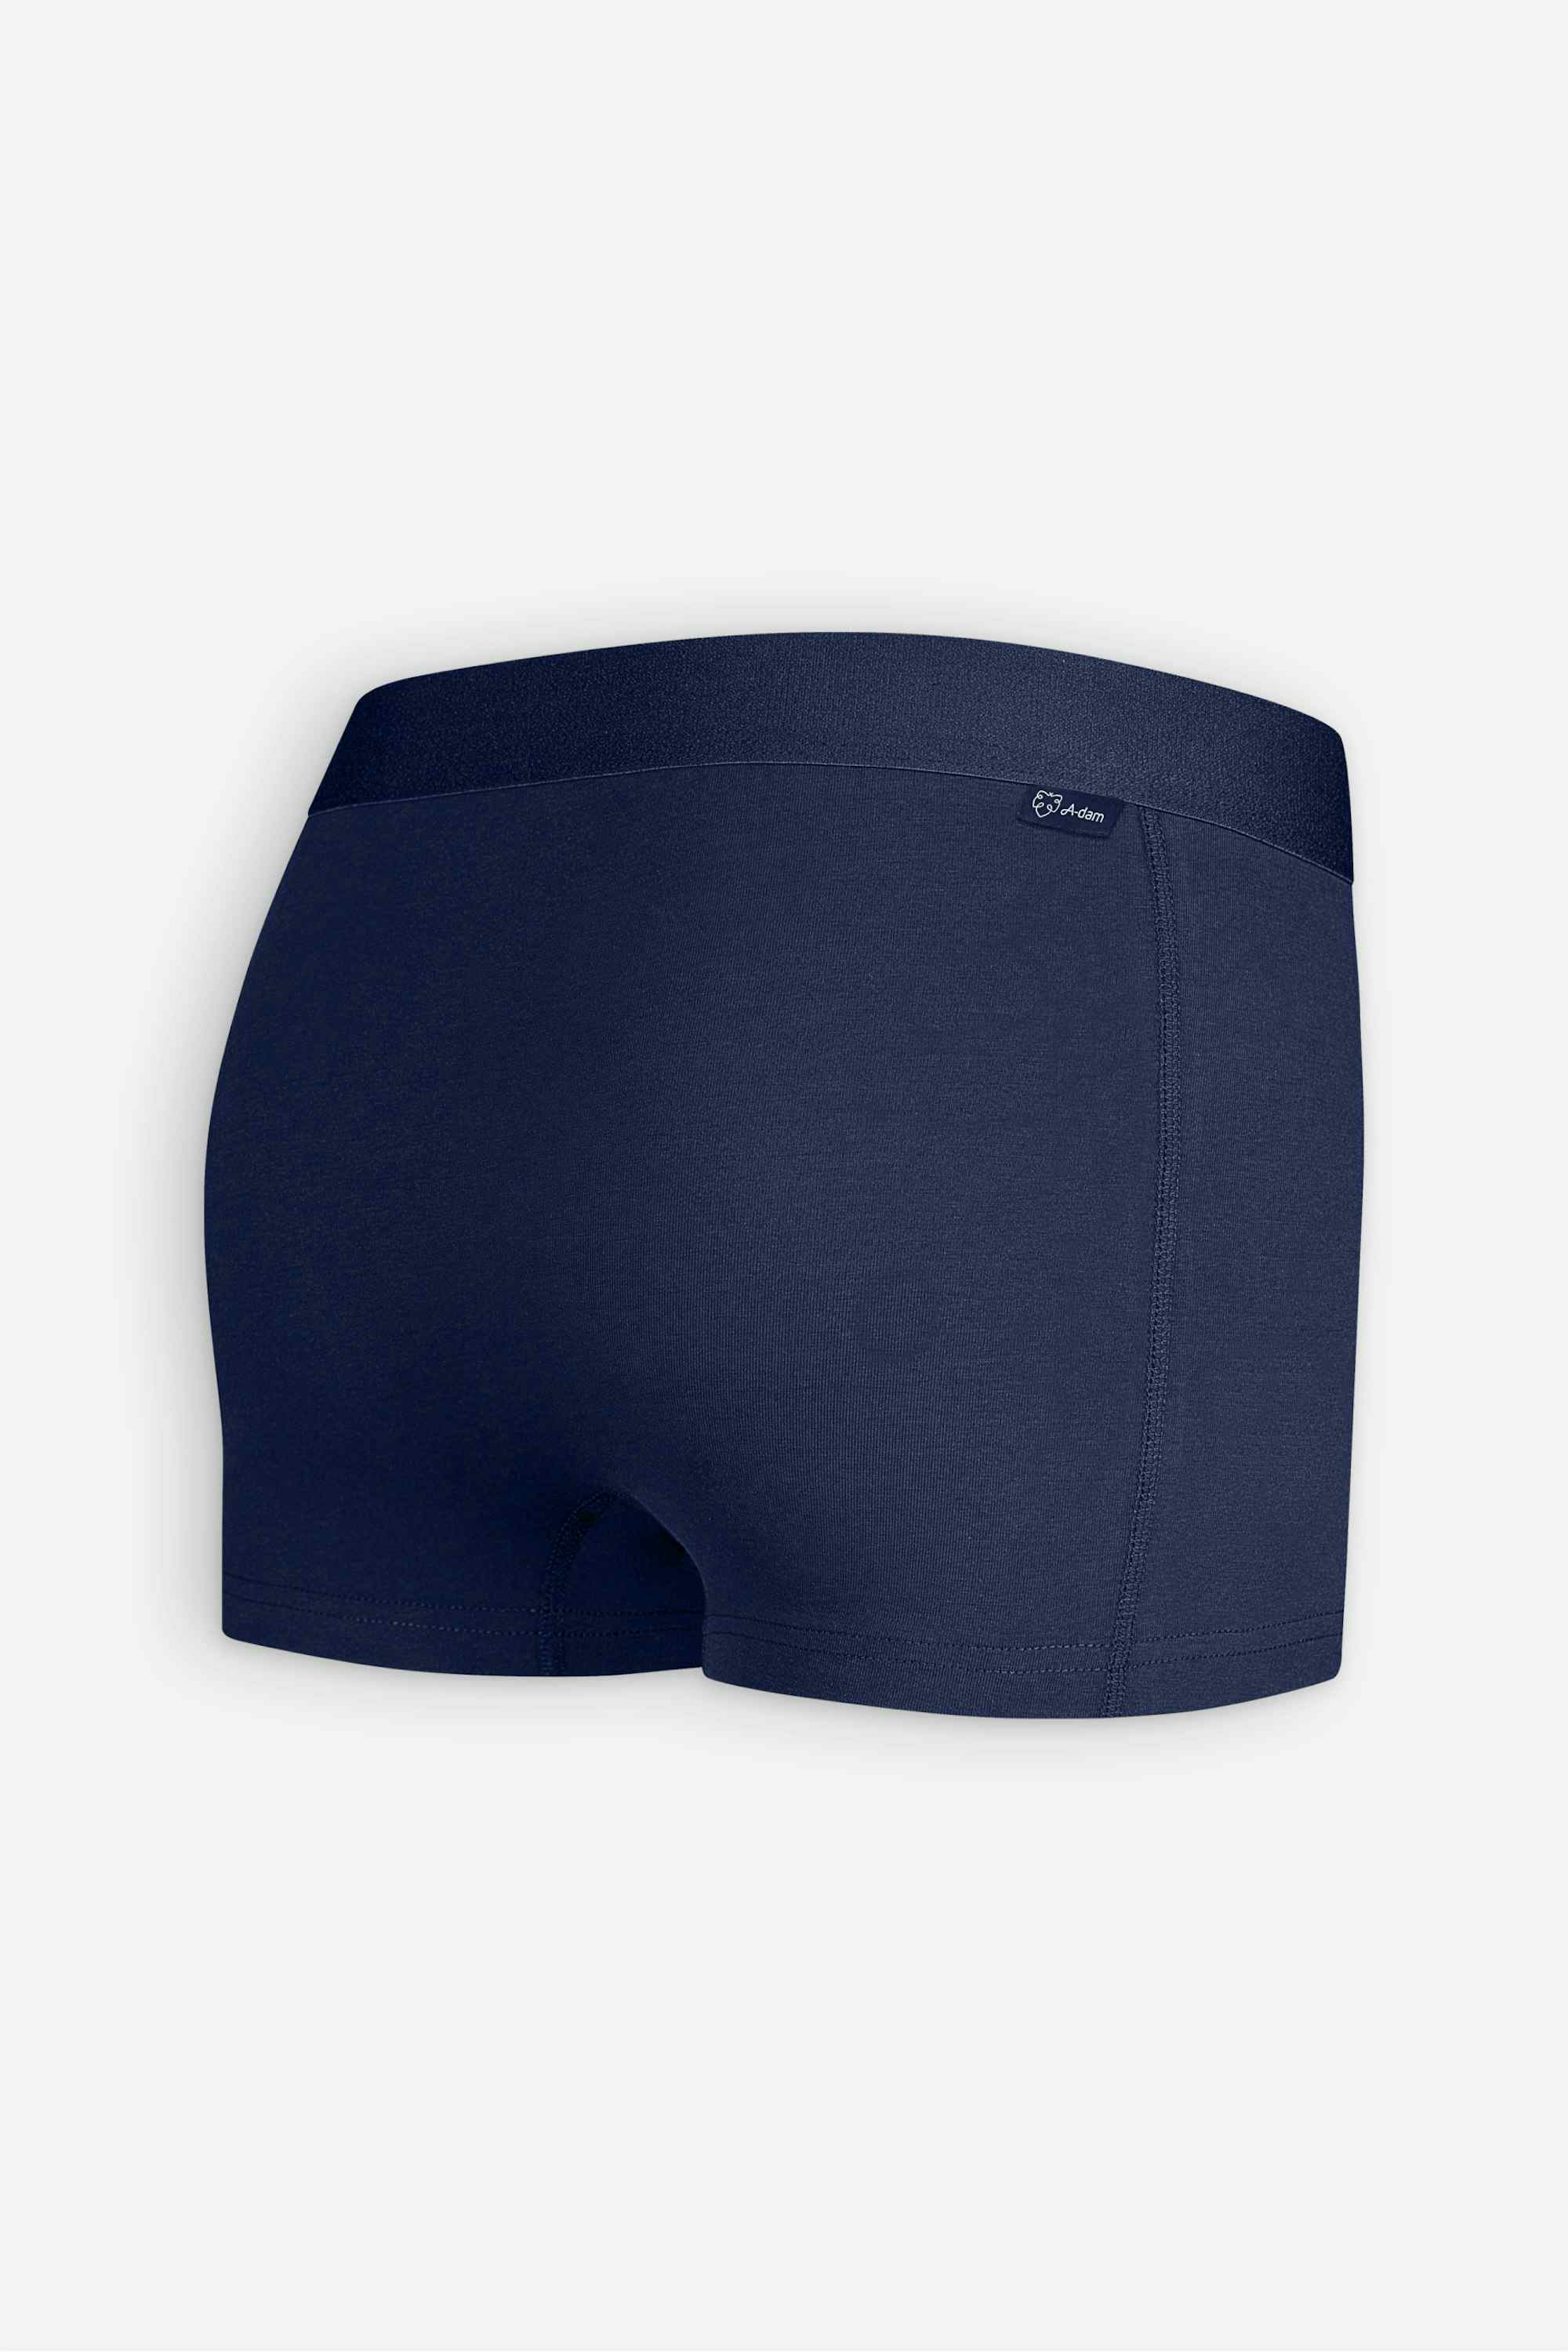 9xSolid Navy Trunks